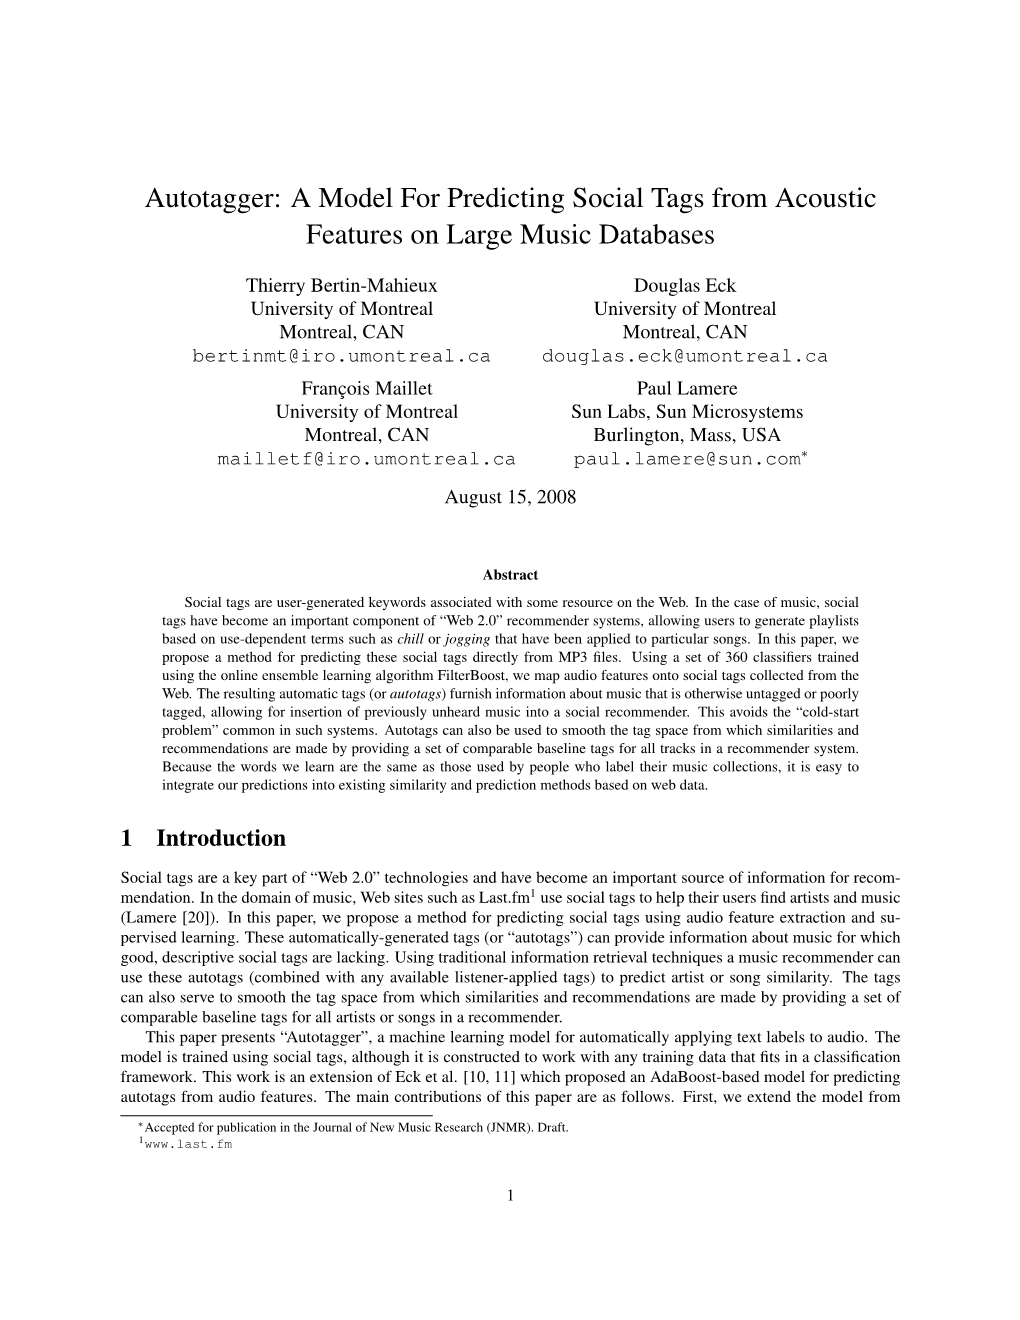 Autotagger: a Model for Predicting Social Tags from Acoustic Features on Large Music Databases